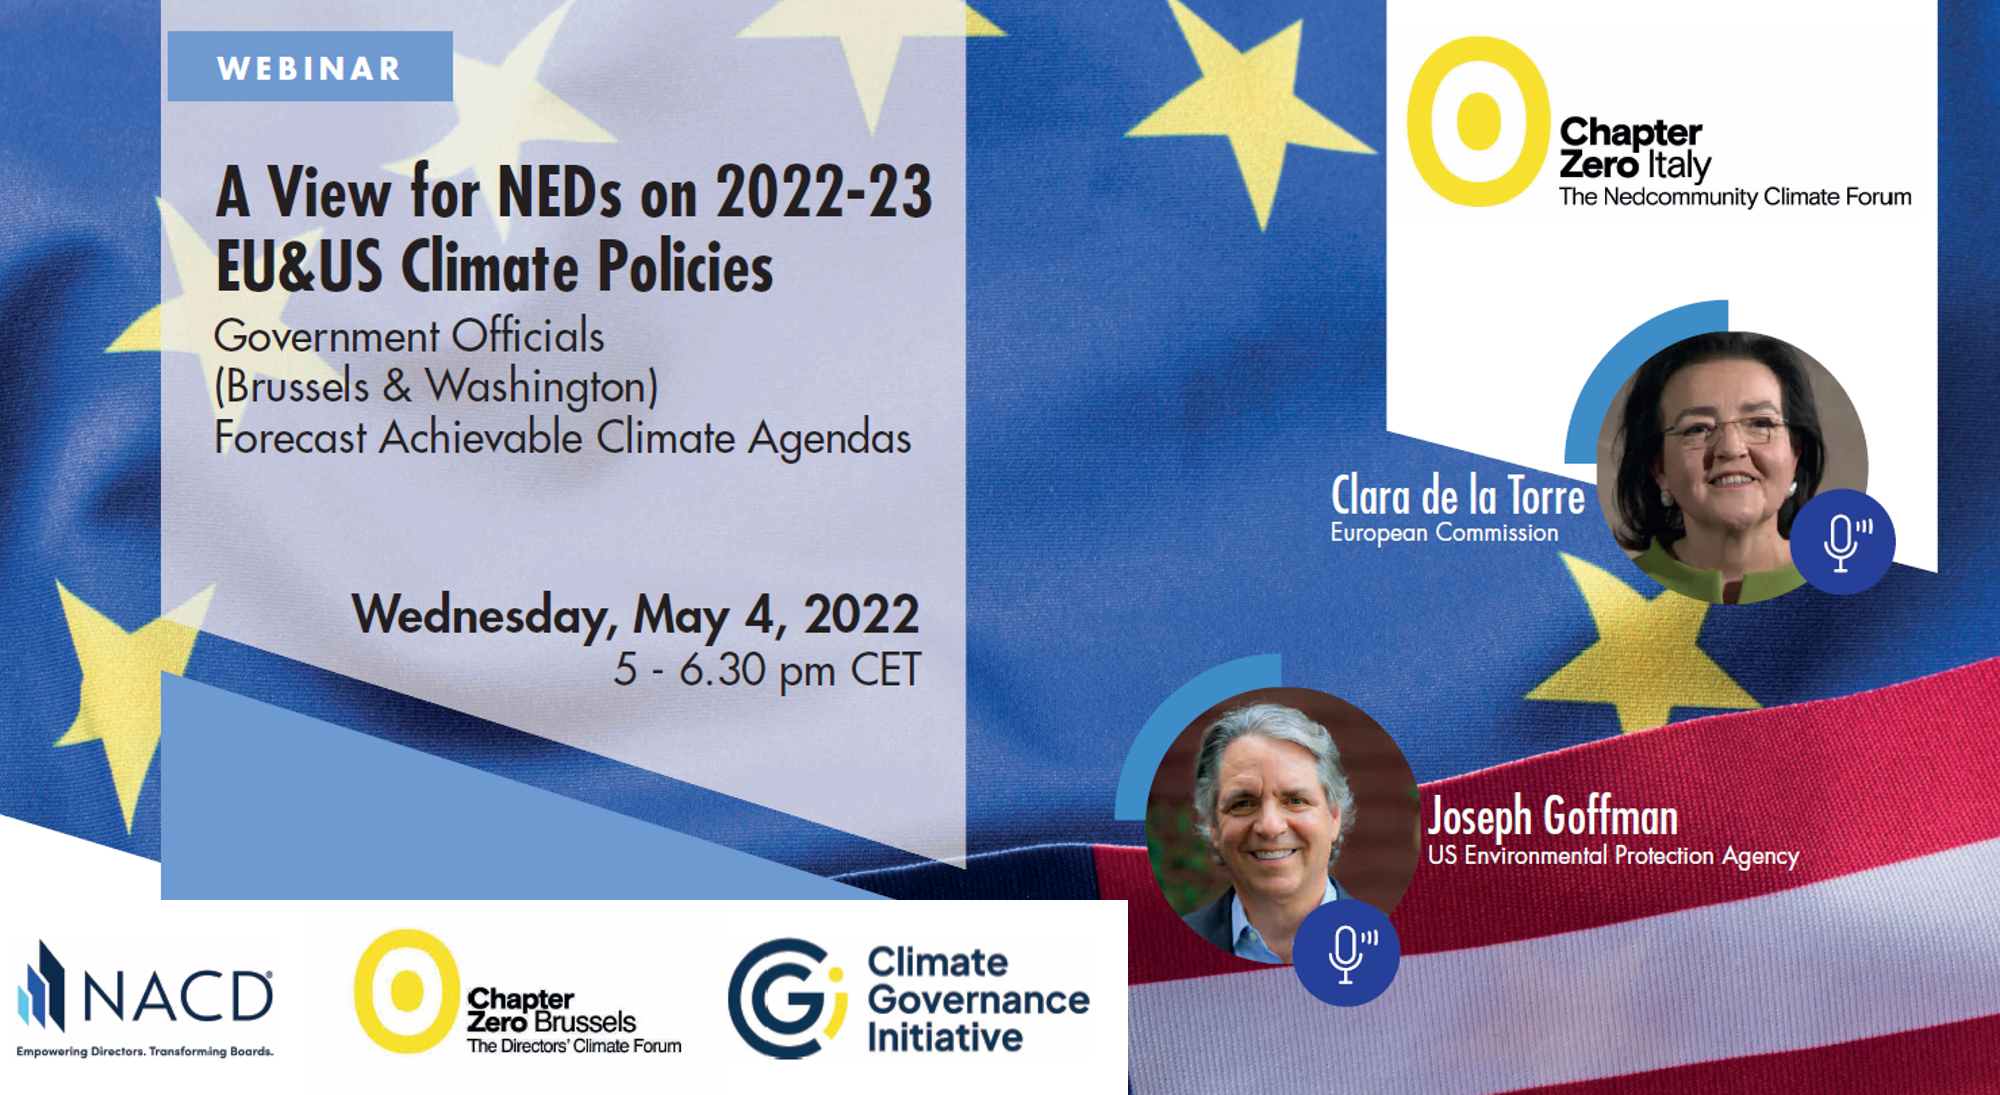 A View for NEDs on 2022-23 EU & US Climate Policies